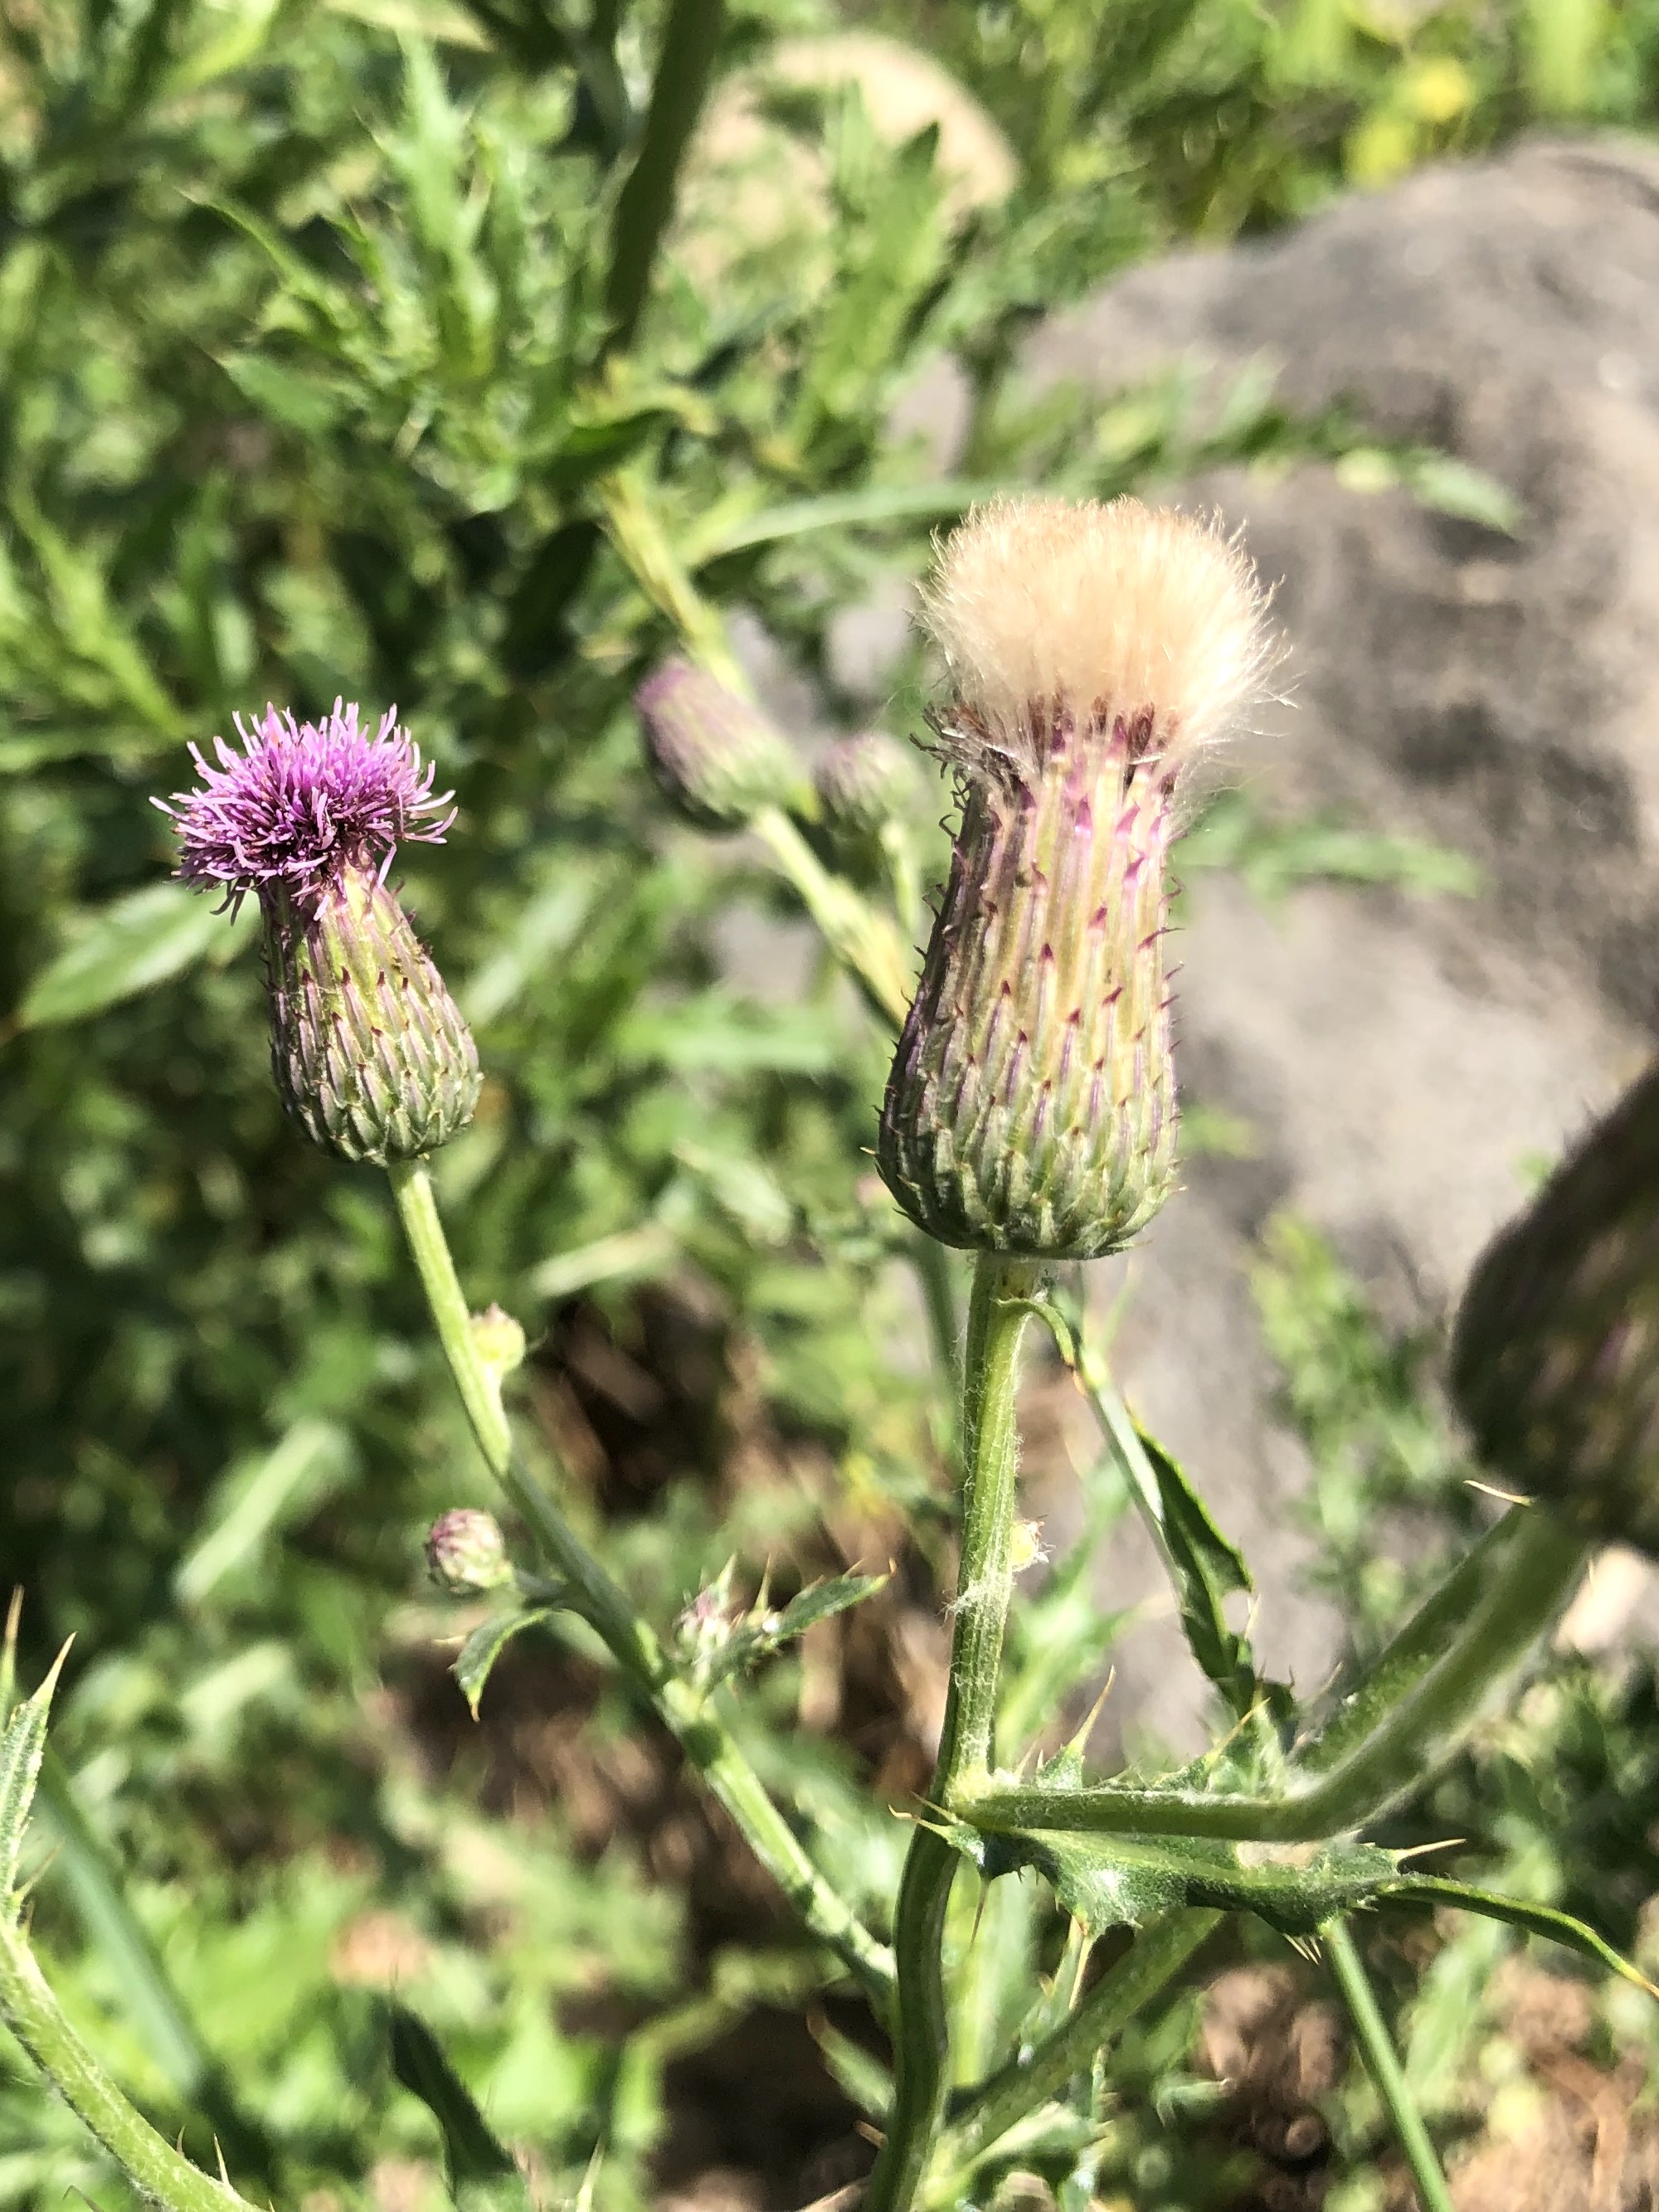 Canada Thistle on the shore of Lake Wingra in Wingra Park in Madison, Wisconsin on July 11, 2019.